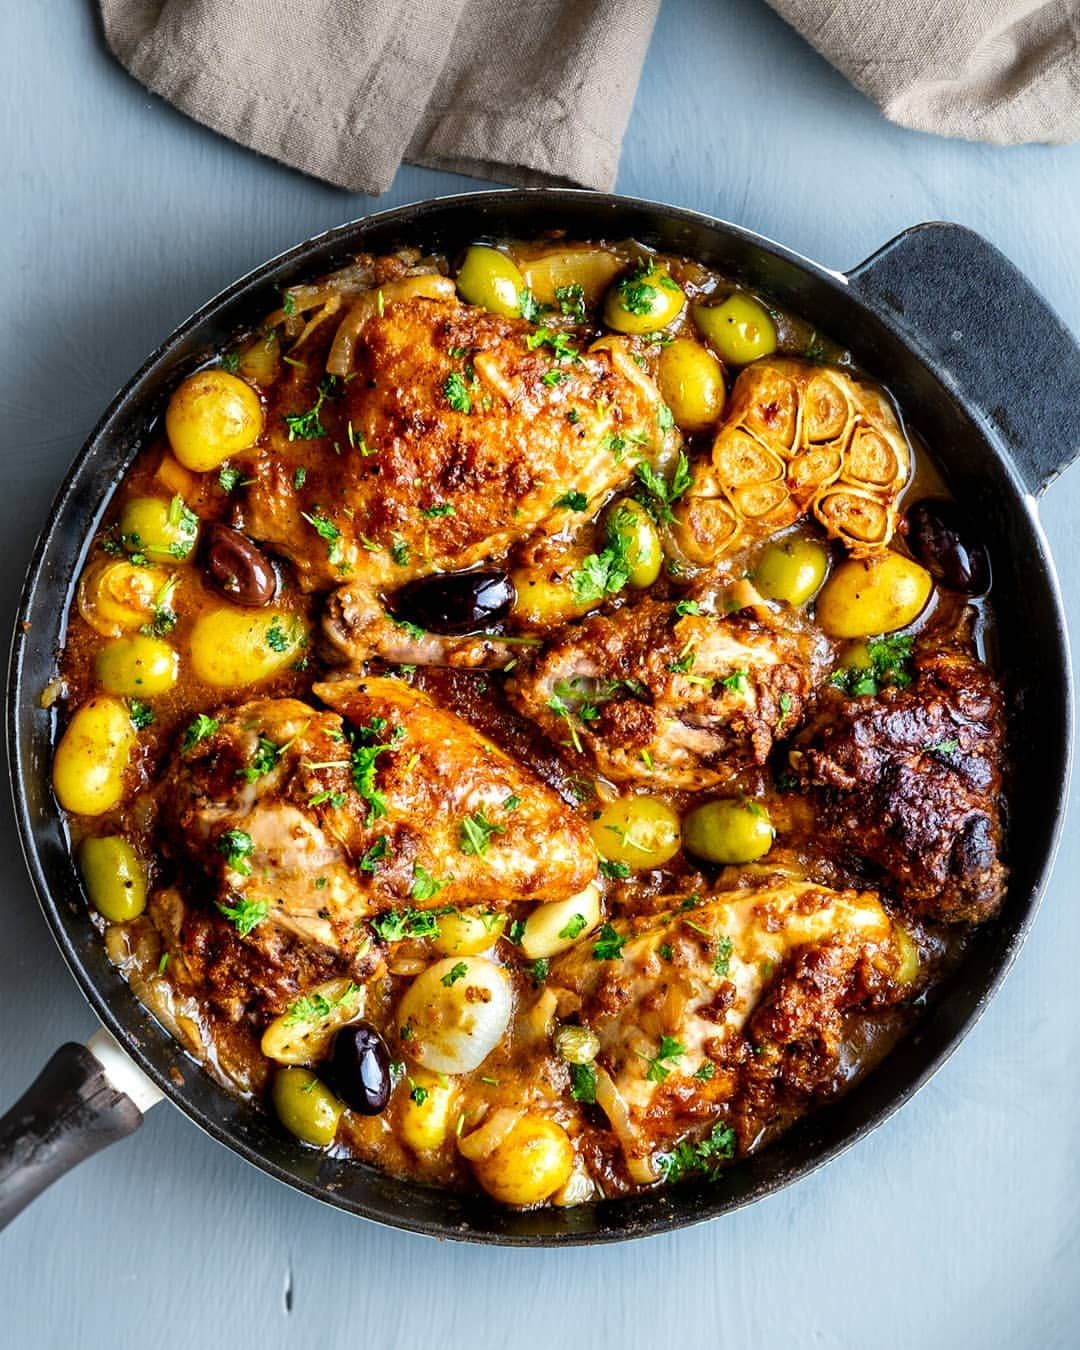 Skillet Chicken with Garlic and Olives in Wine Sauce by khabakom ...